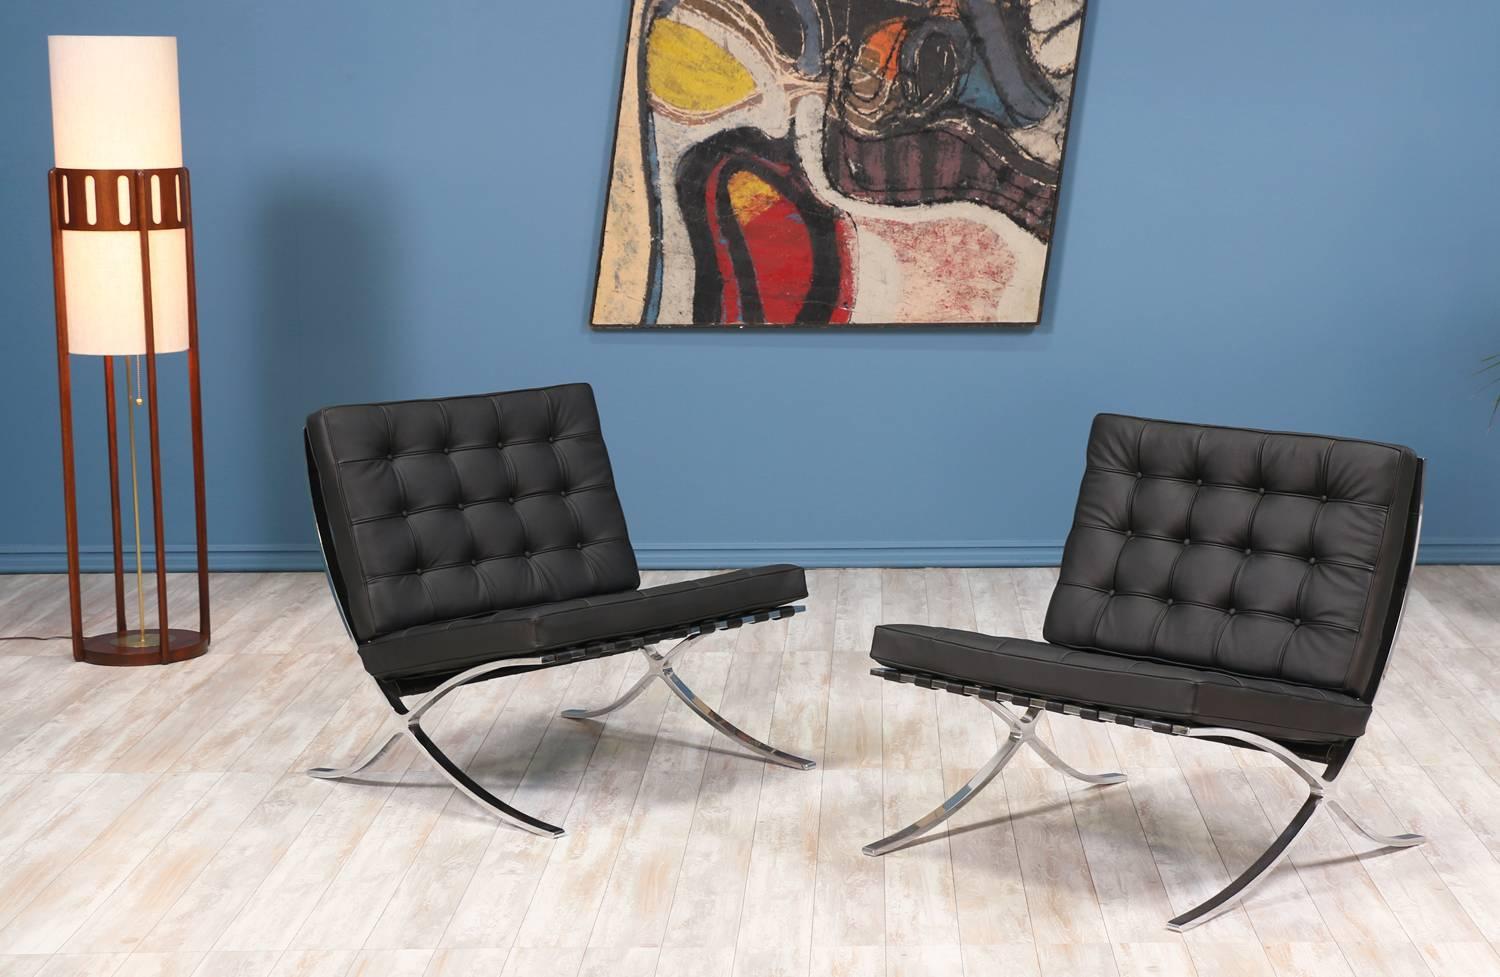 A pair of “Barcelona” chairs designed by Ludwig Mies van der Rohe for Florence Knoll Inc. in the United States circa 1960’s. Initially created for the German Pavilion at the Barcelona exposition, each chair features a stable and newly polished steel